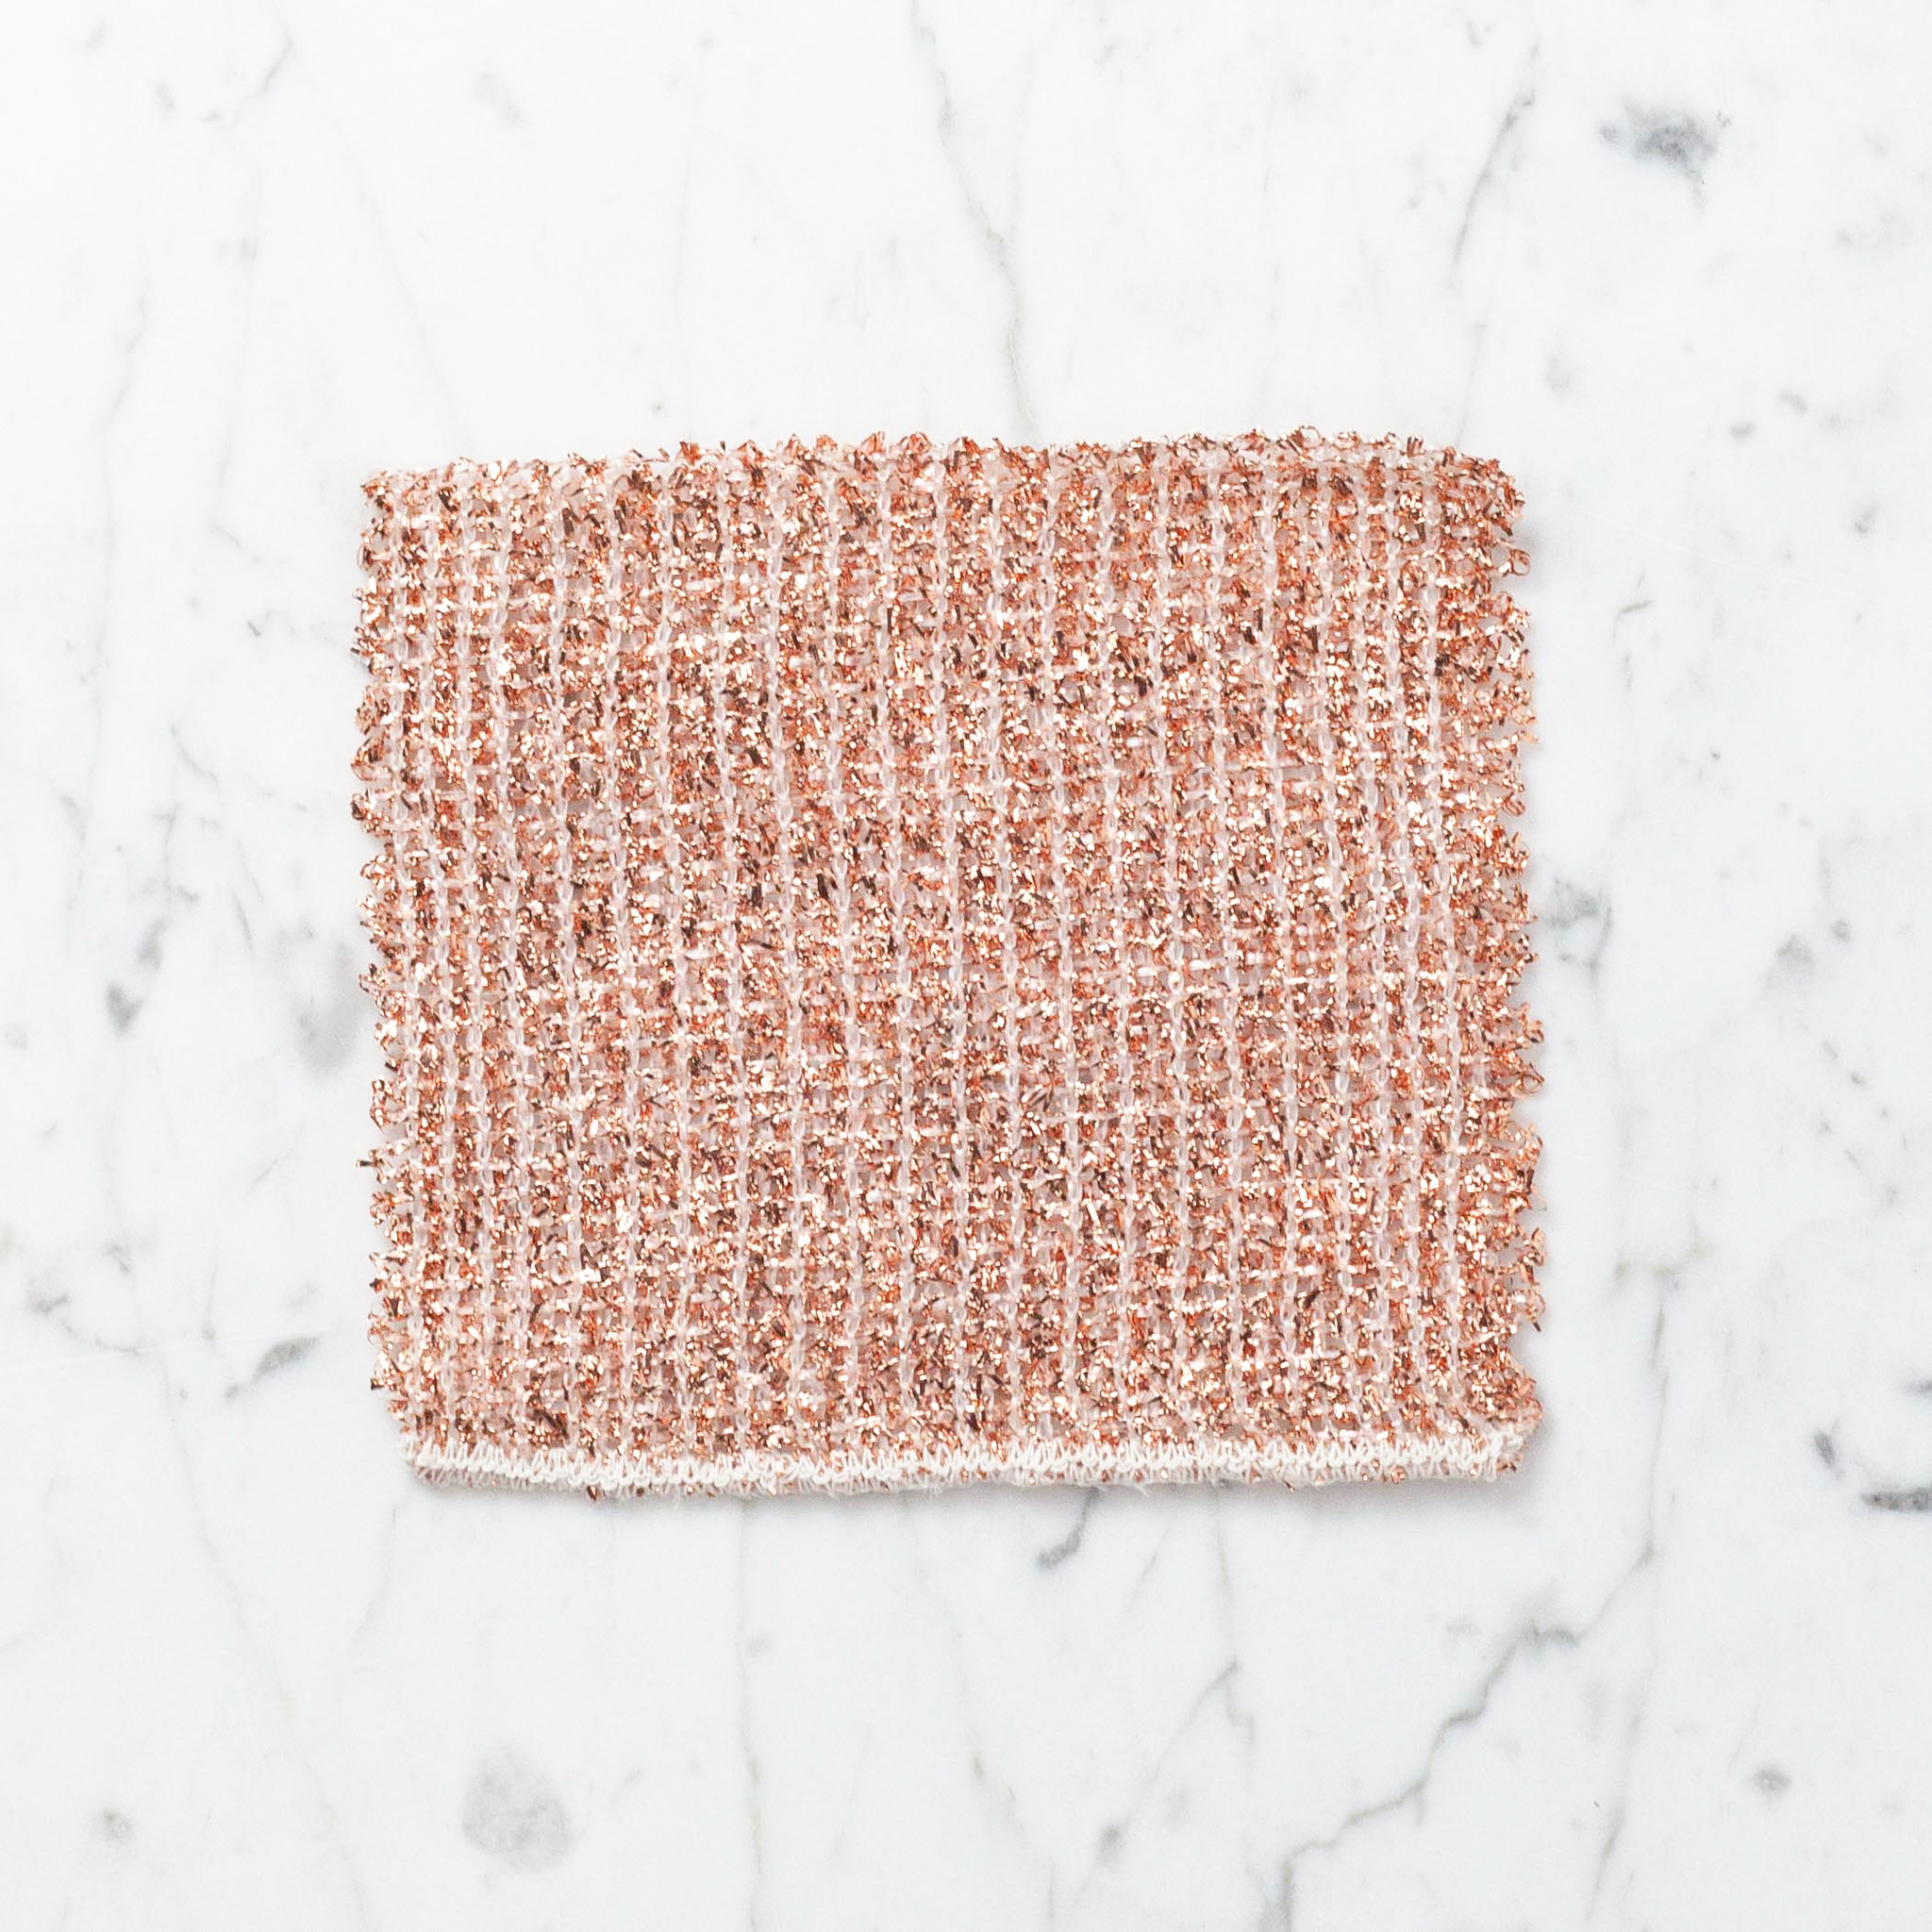 Copper Cleaning Cloth Scrubber